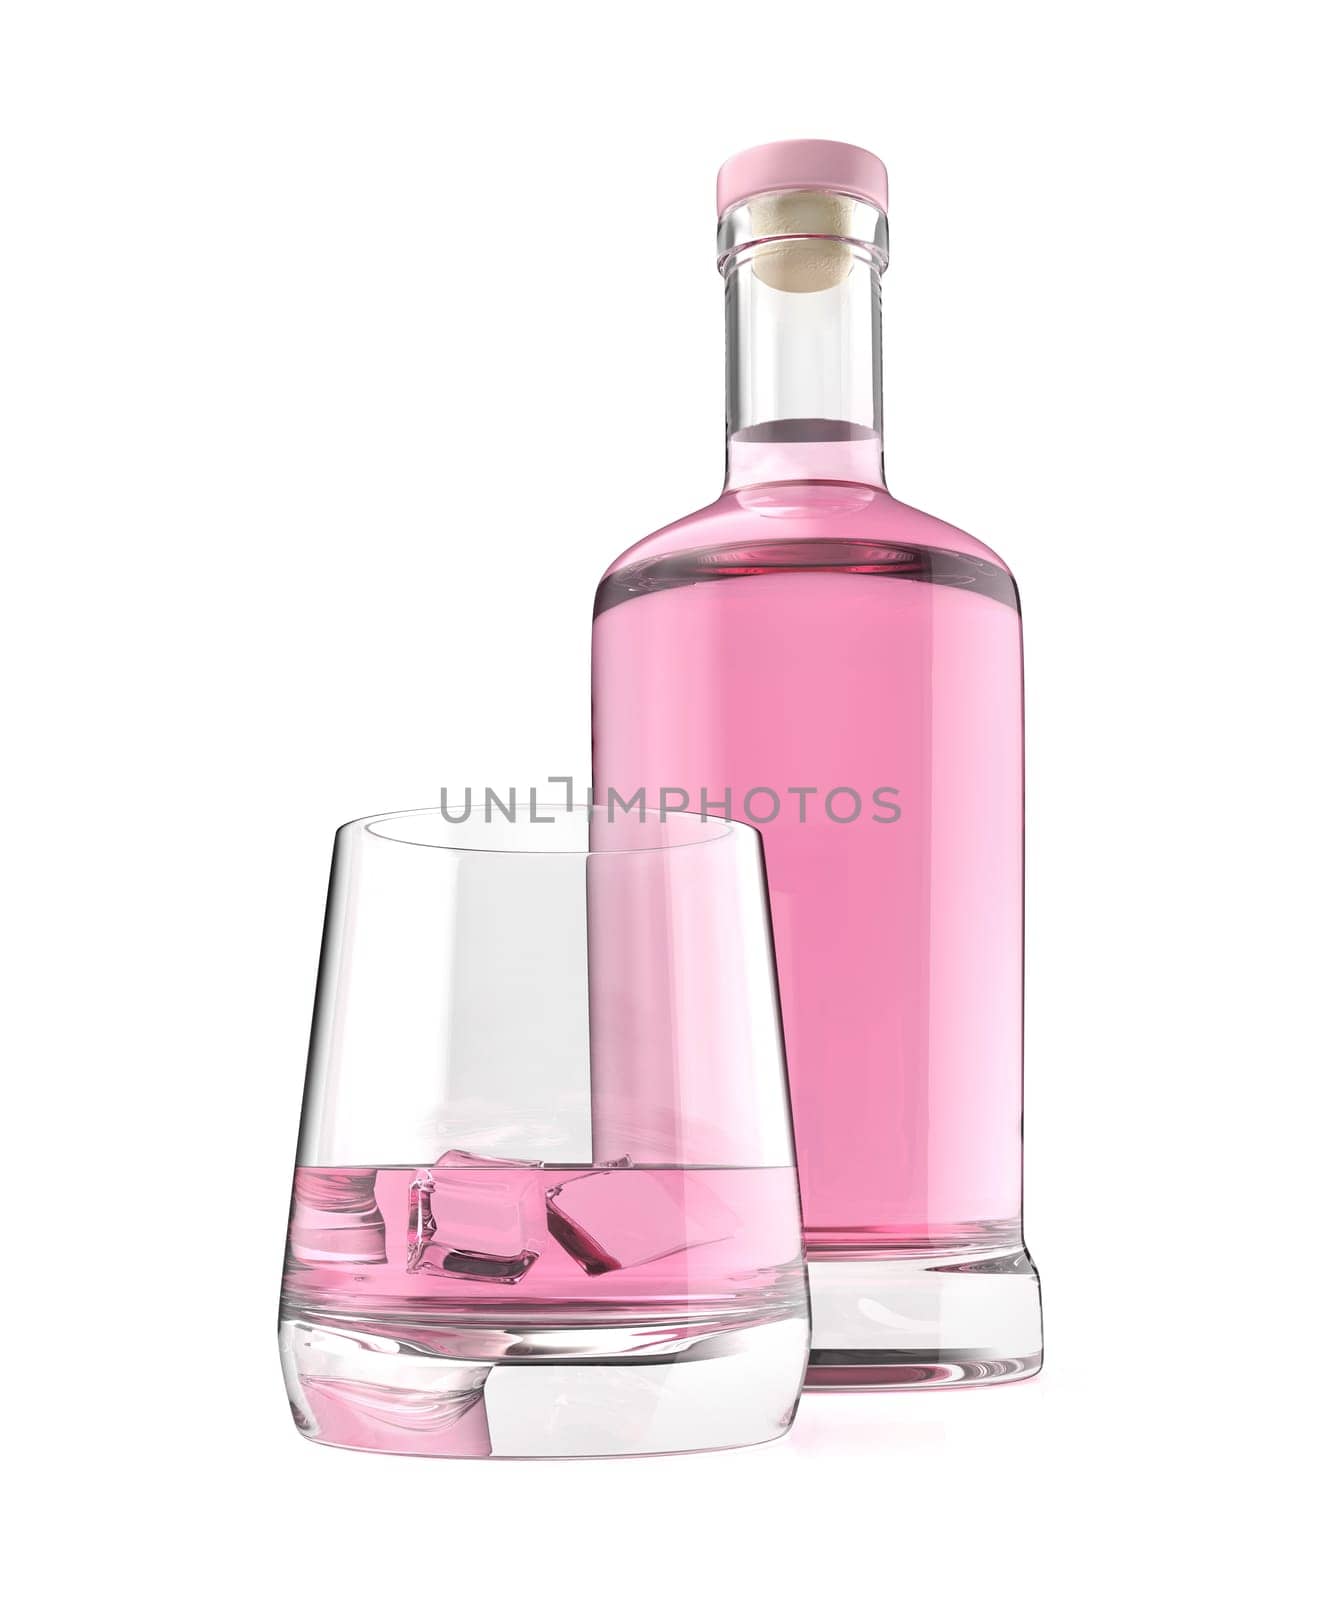 Glass bottle and a glass of pink gin or vodka on white background